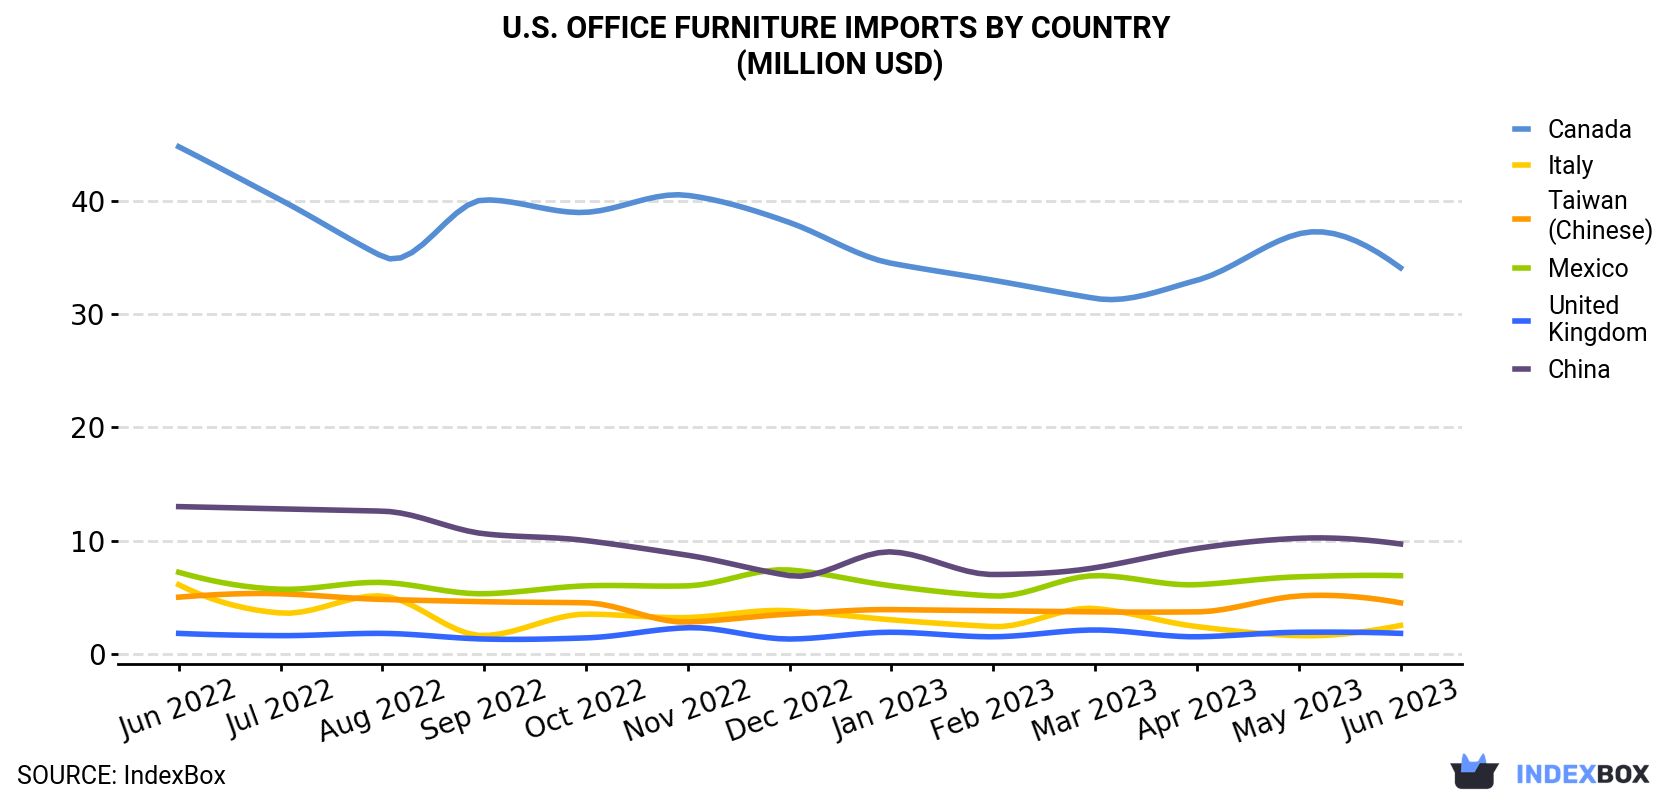 U.S. Office Furniture Imports By Country (Million USD)